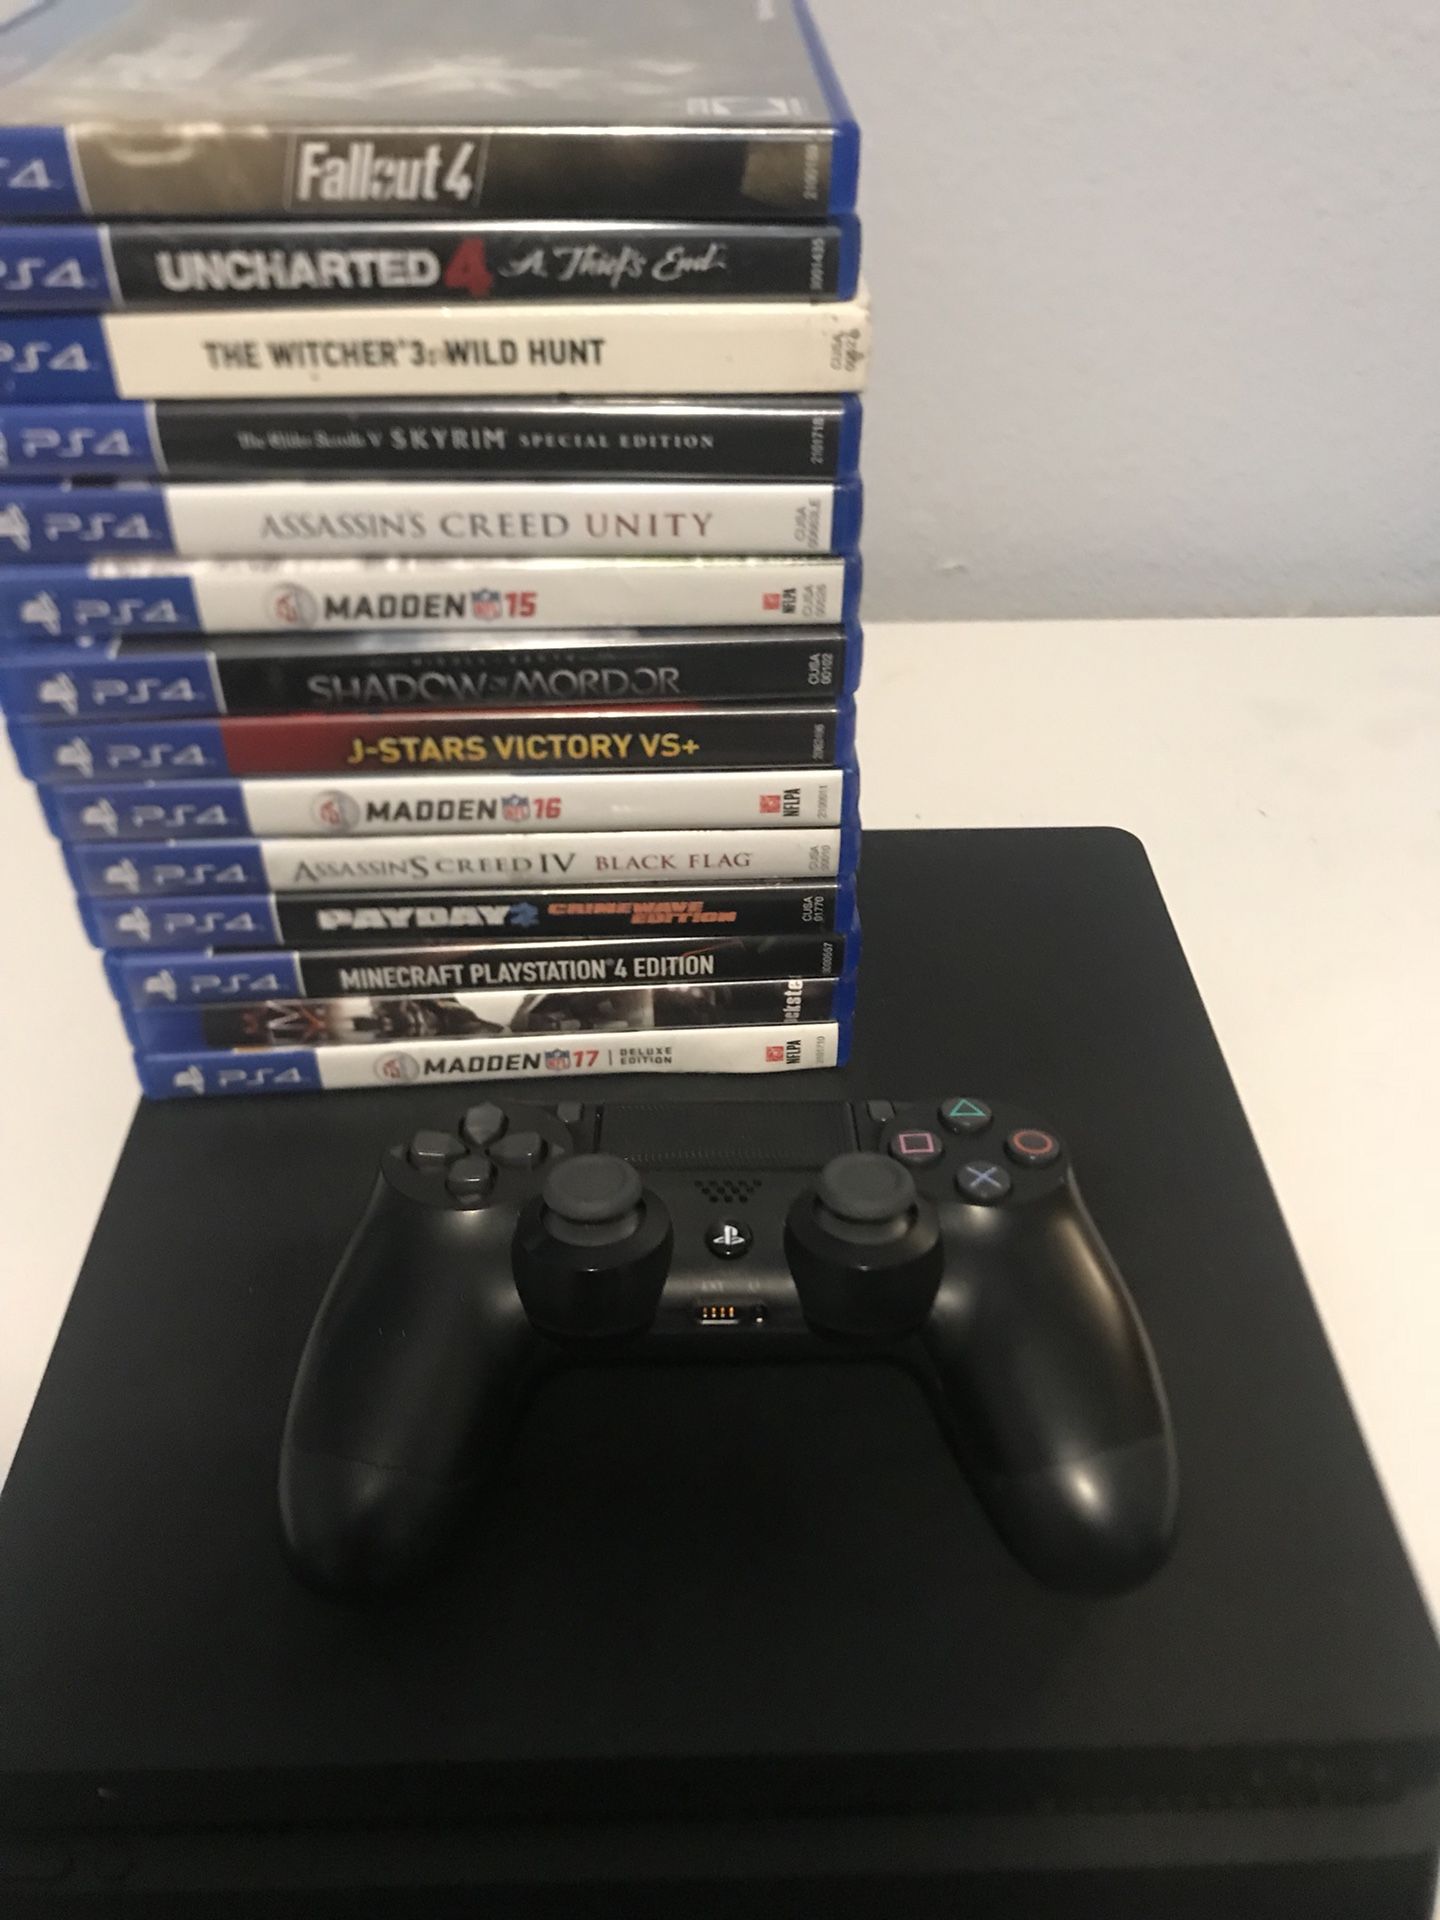 PS4 slim with 14 games